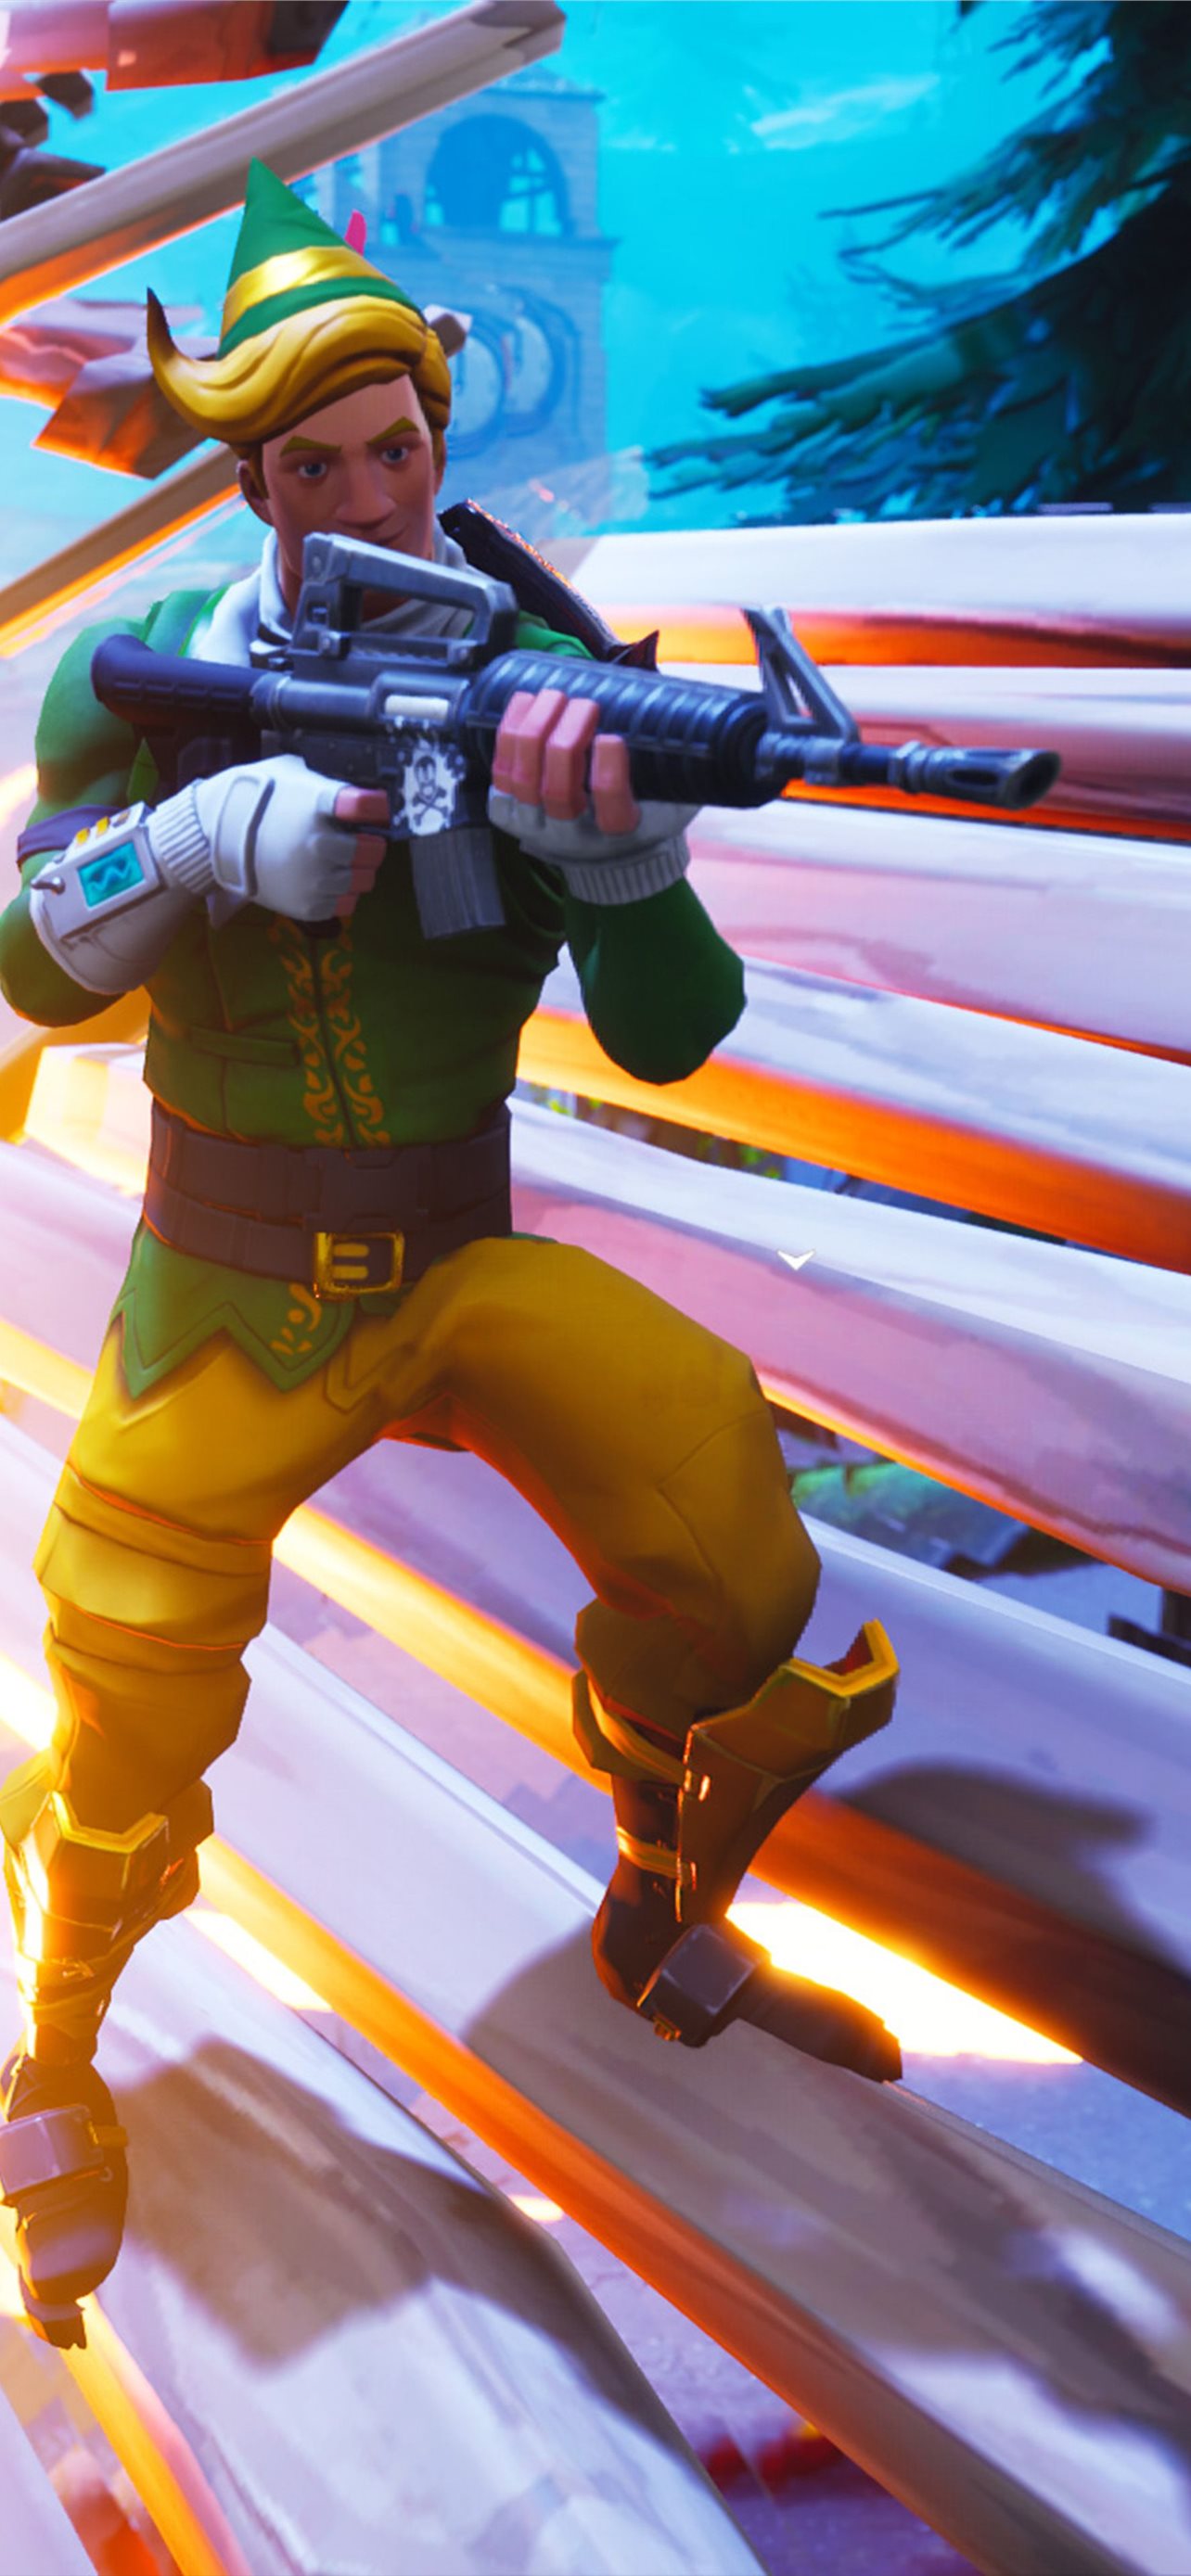 Fortnite Battle Royale 4K Christmas on Dog iPhone Wallpapers Free